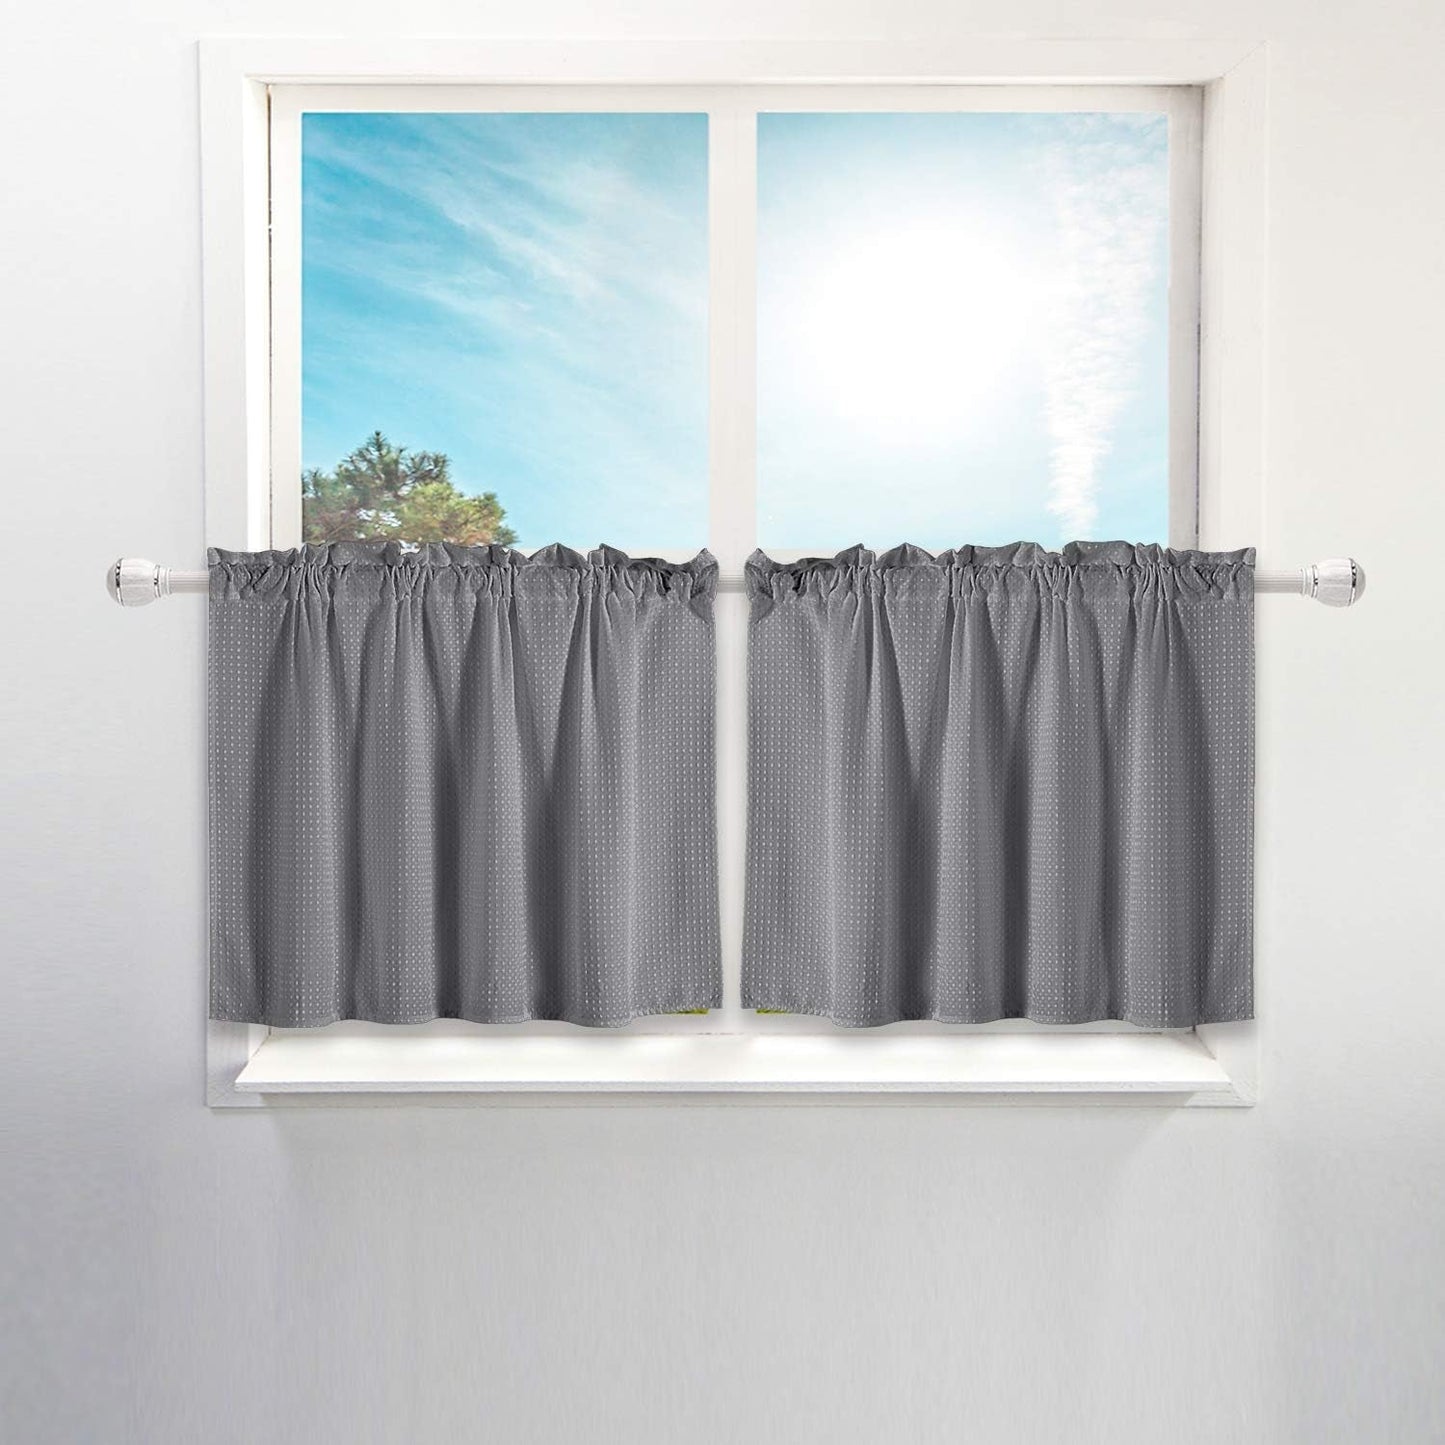 Barossa Design Waffle Weave Half Window Tier Curtains: Small Bathroom Window Curtains Waterproof with 36 Inch Length Short Length for Cafe & Kitchen - White, 36"X36" for Each Panel, Set of 2